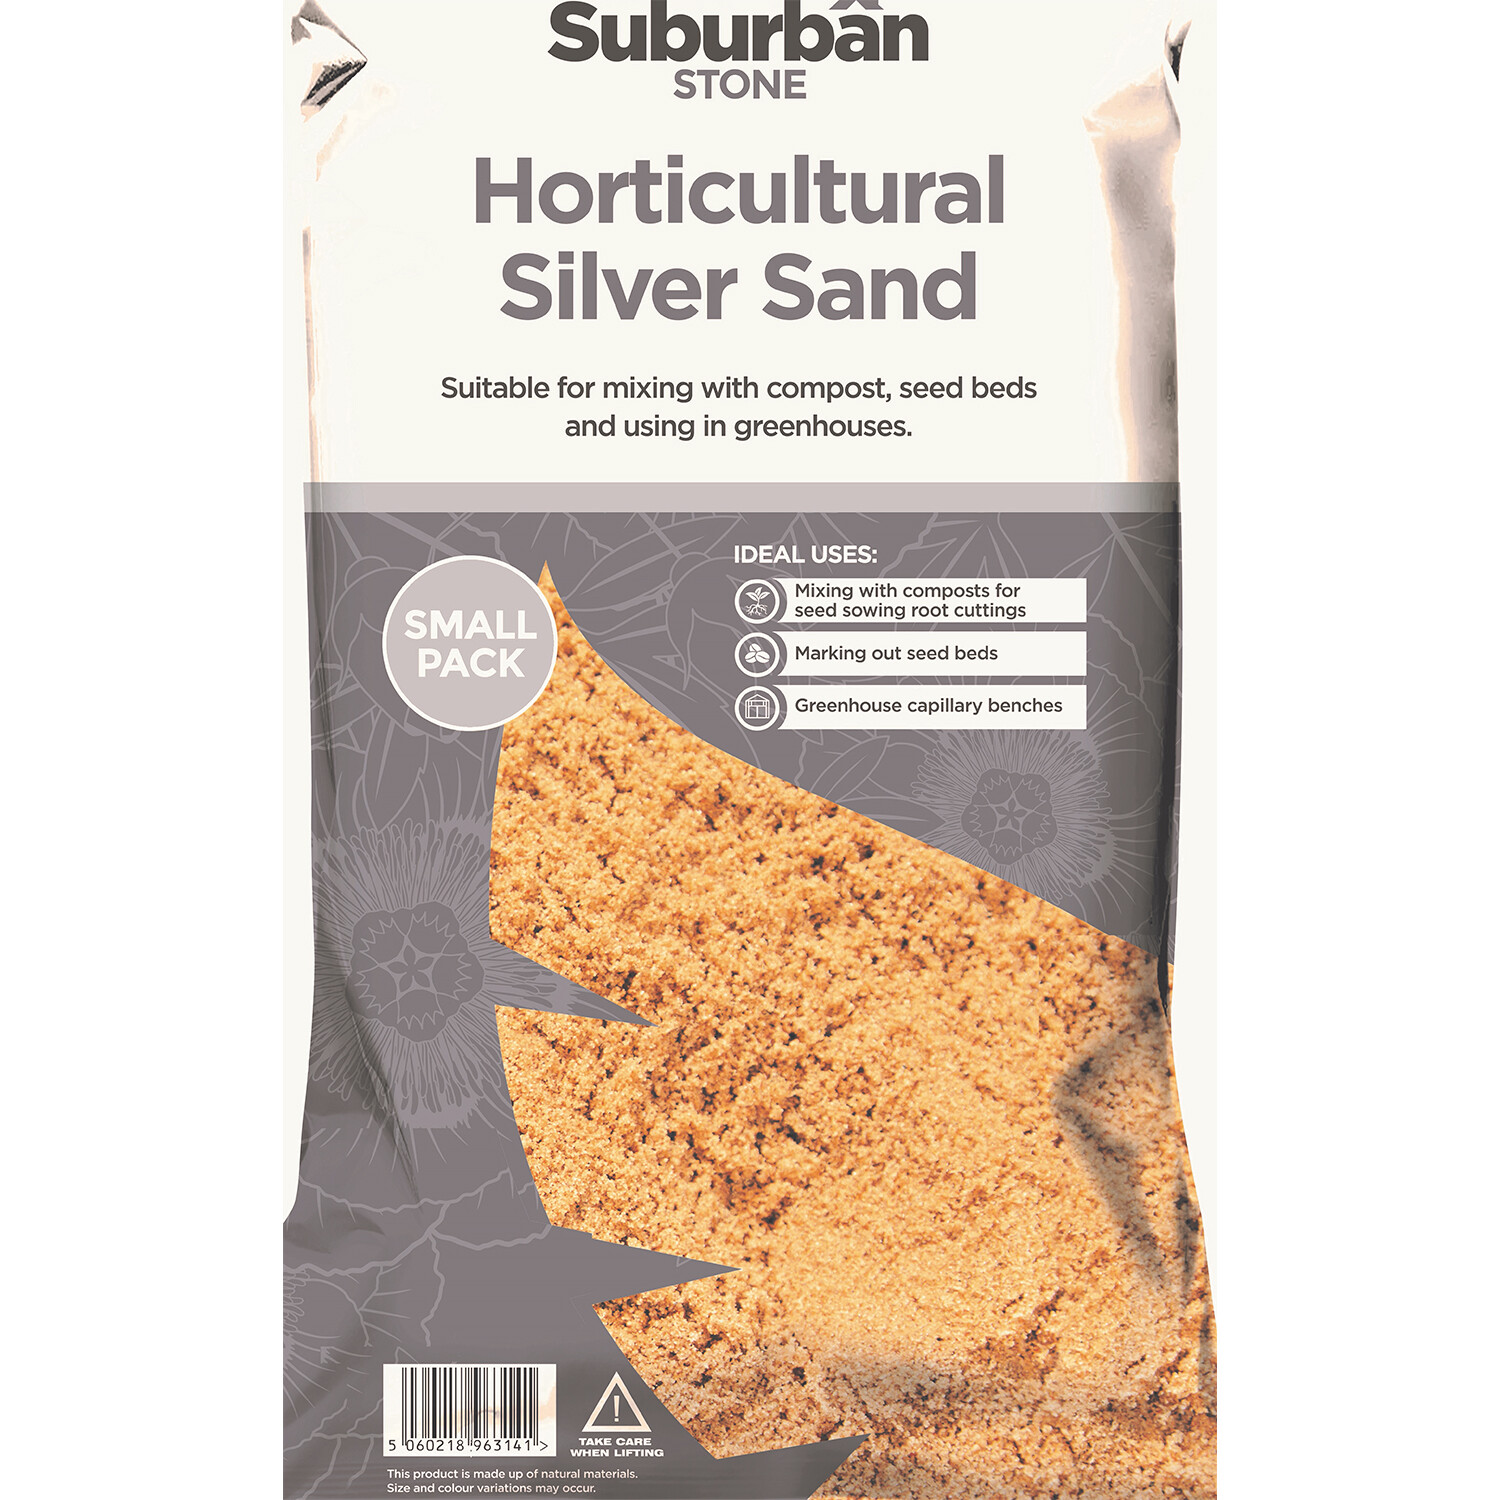 Suburban Stone Horticultural Silver Sand 5kg Image